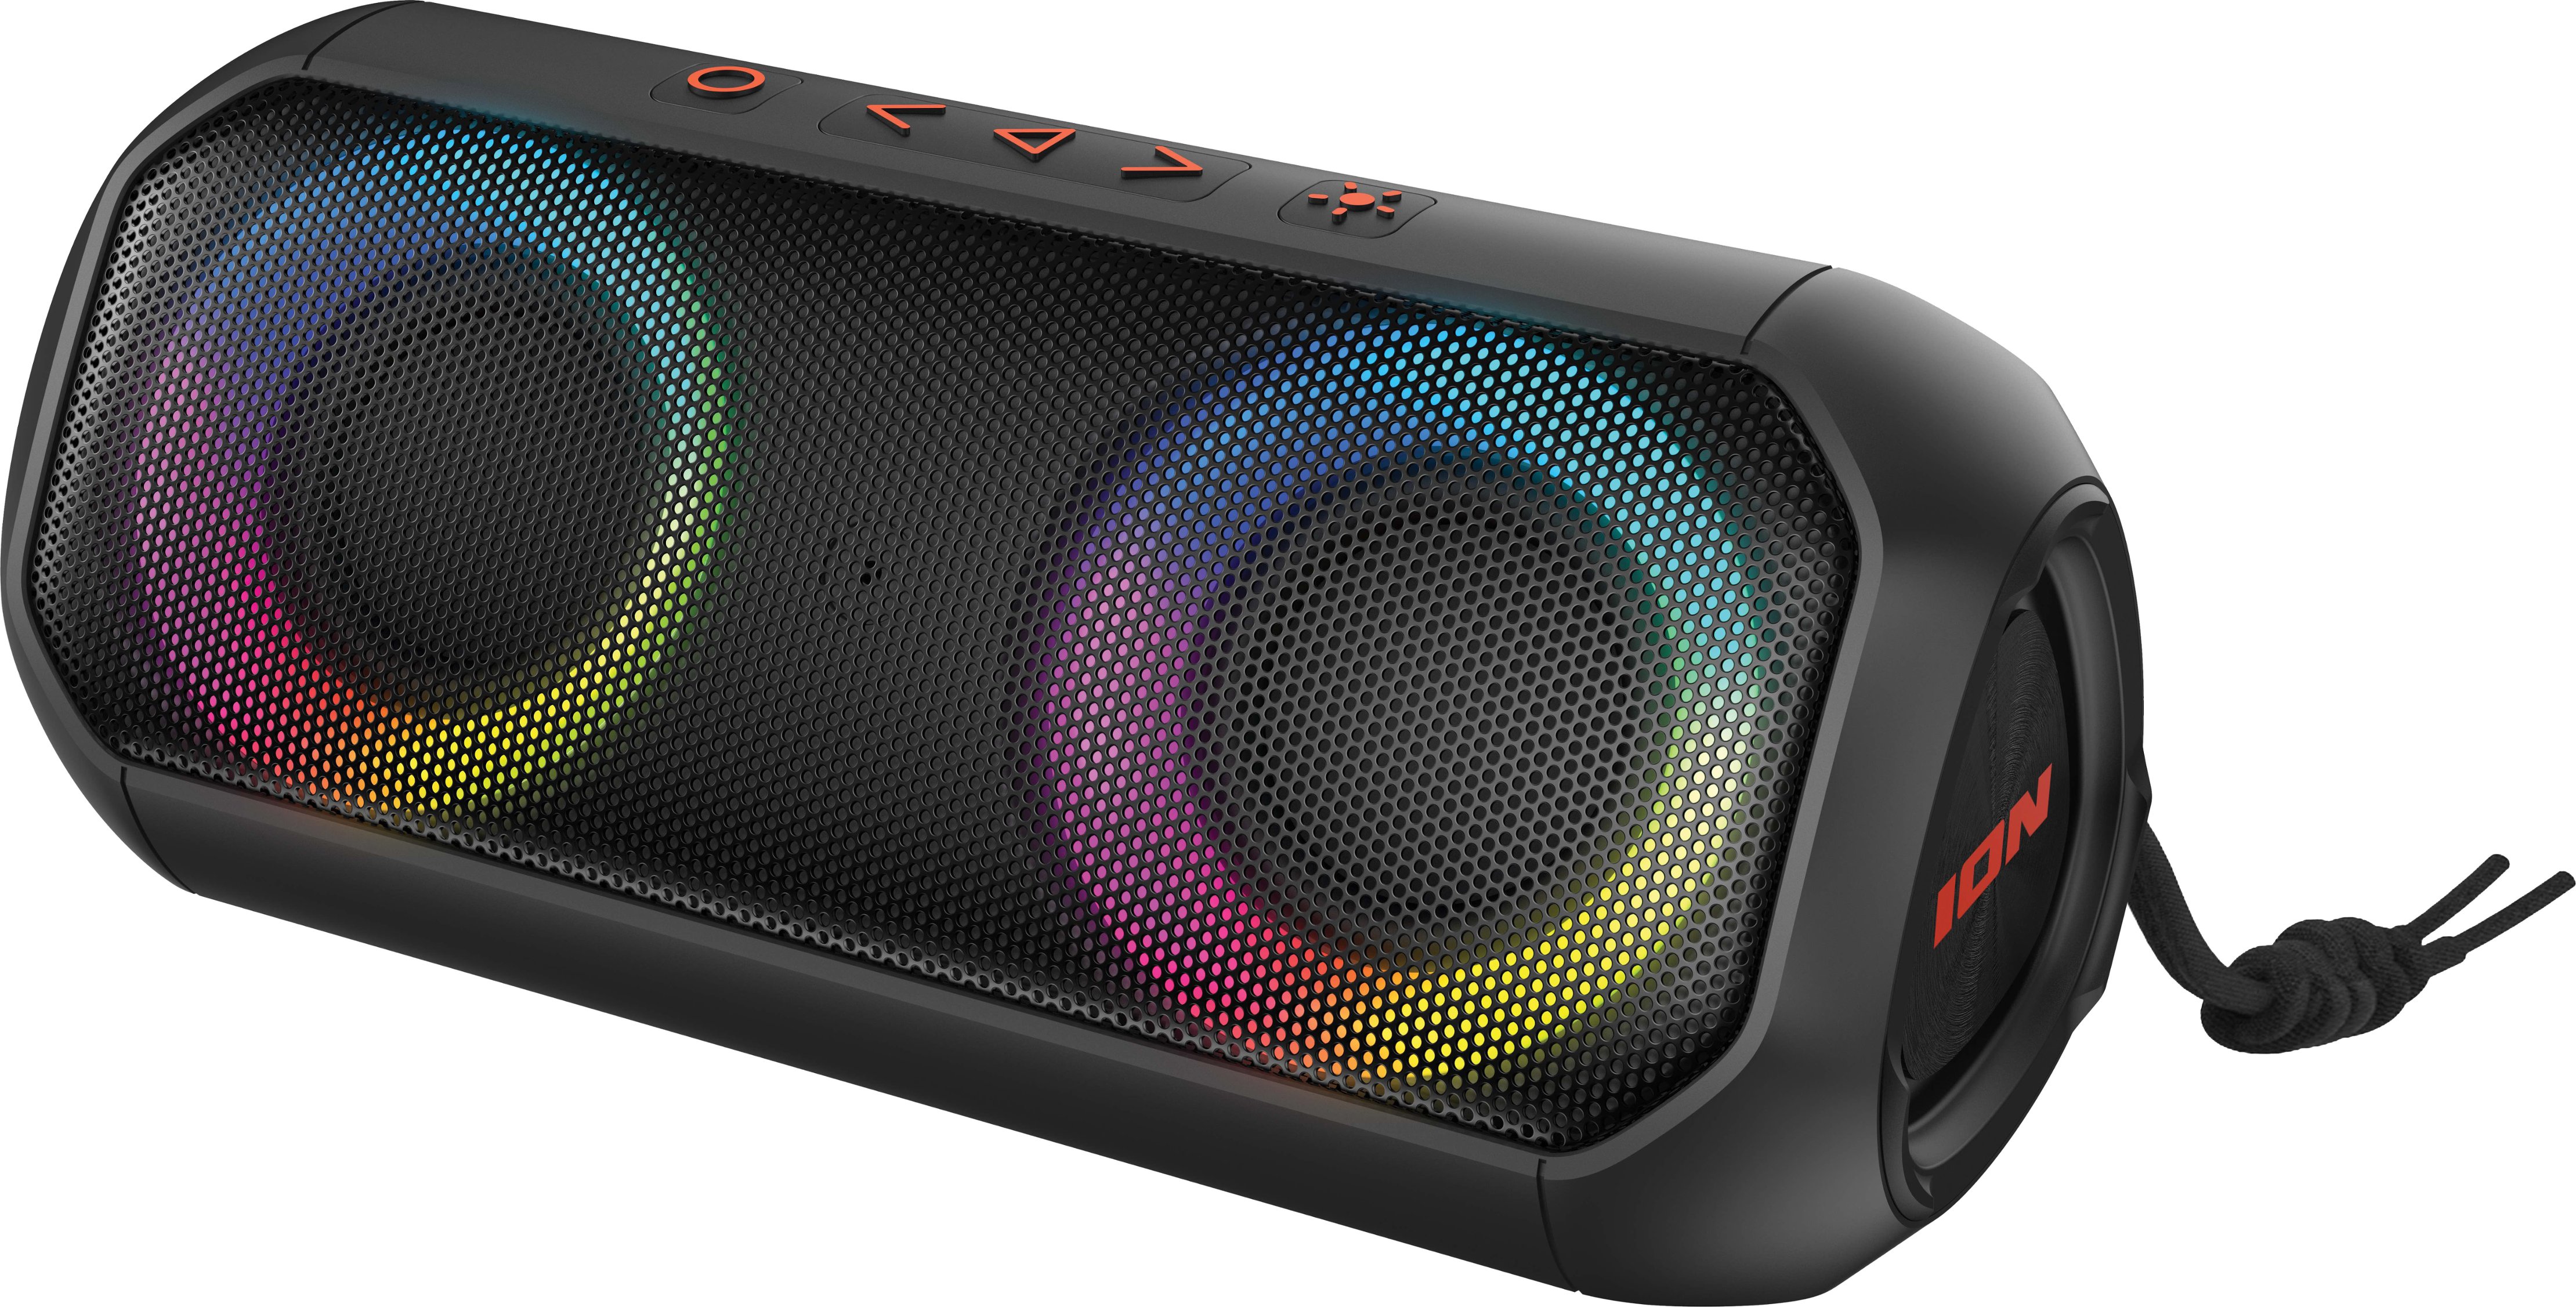 Boom LED Audio Multi-Colored Lights Built-In Black 40W - Portable All-Weather Uber Speaker Microphone UBERBOOMXUS Buy Best Bluetooth Wireless ION and with